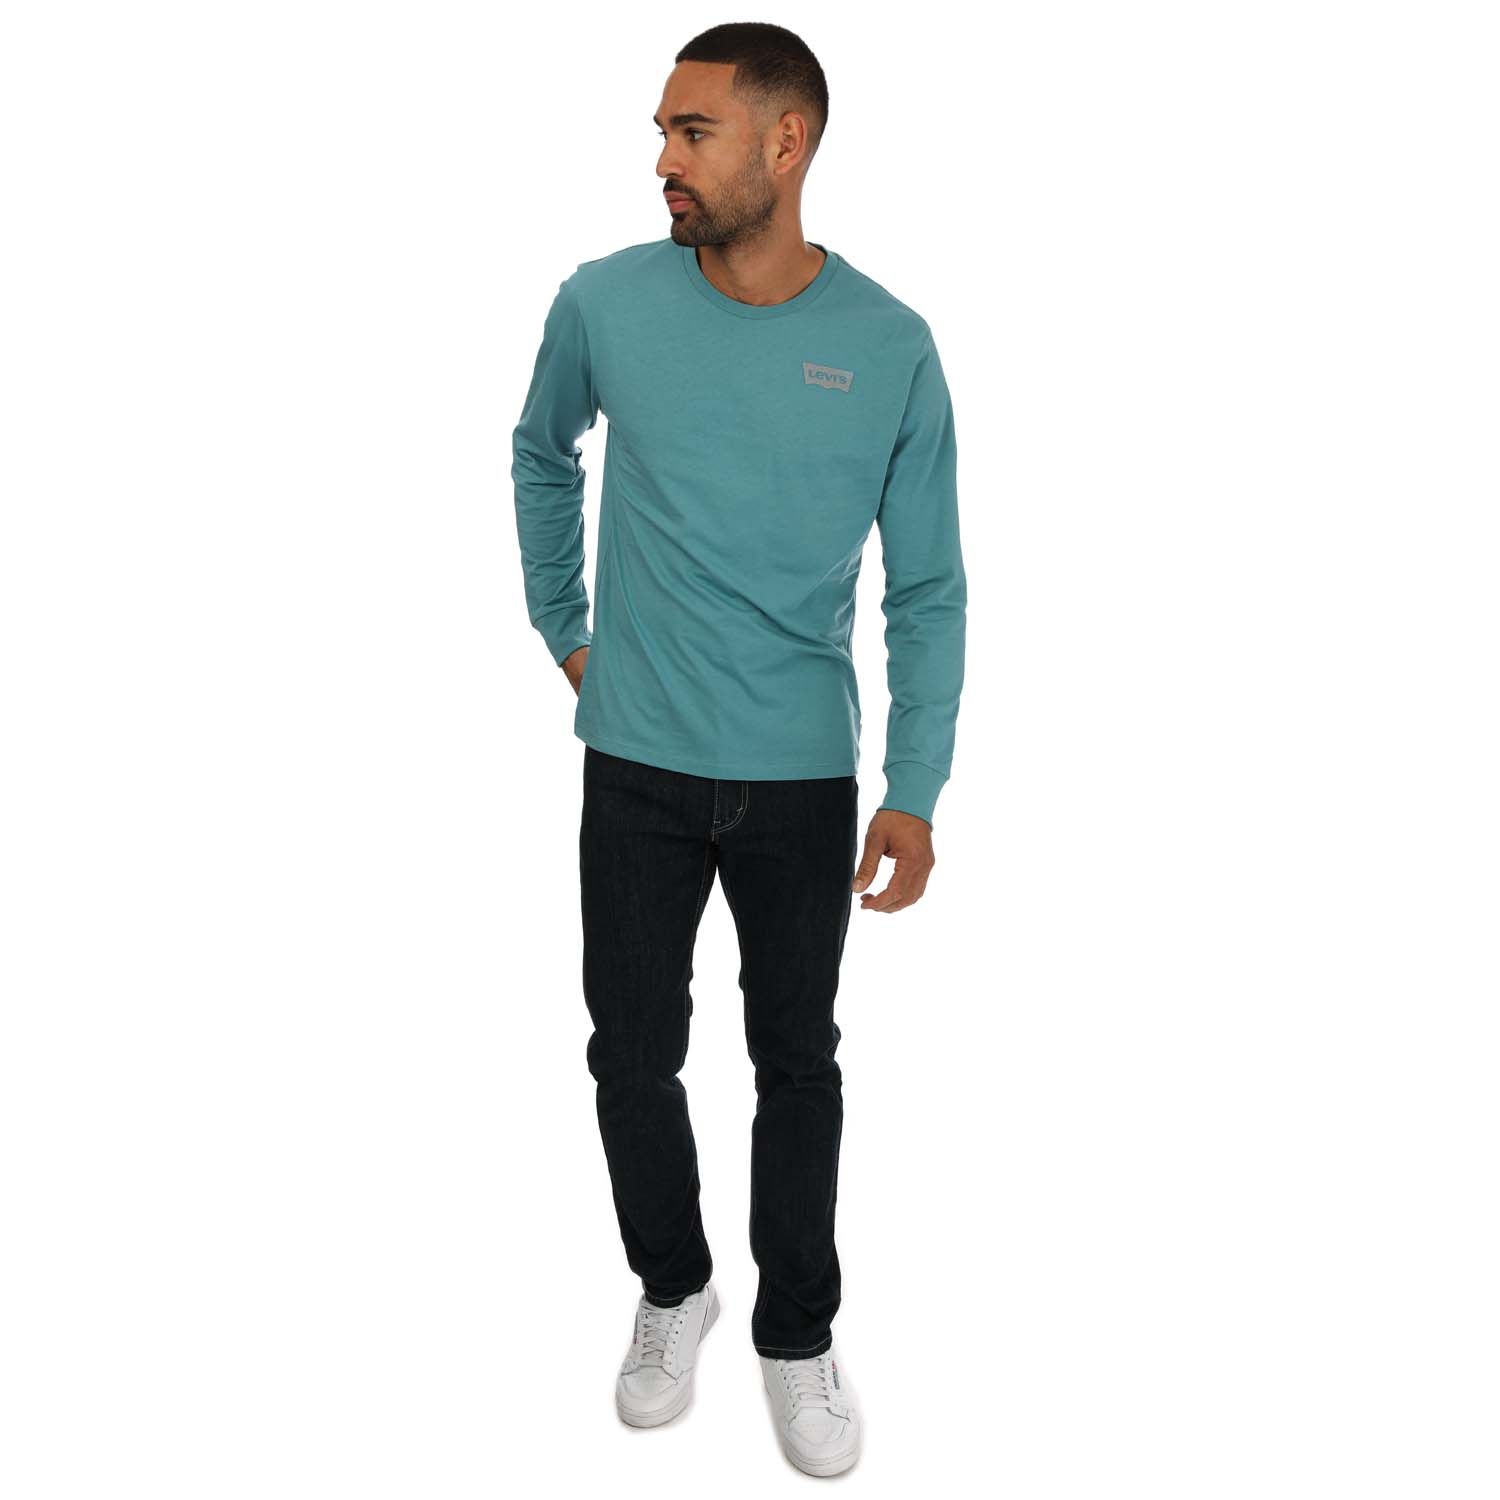 Teal Levis Mens Batwing Long Sleeve T-Shirt - Get The Label